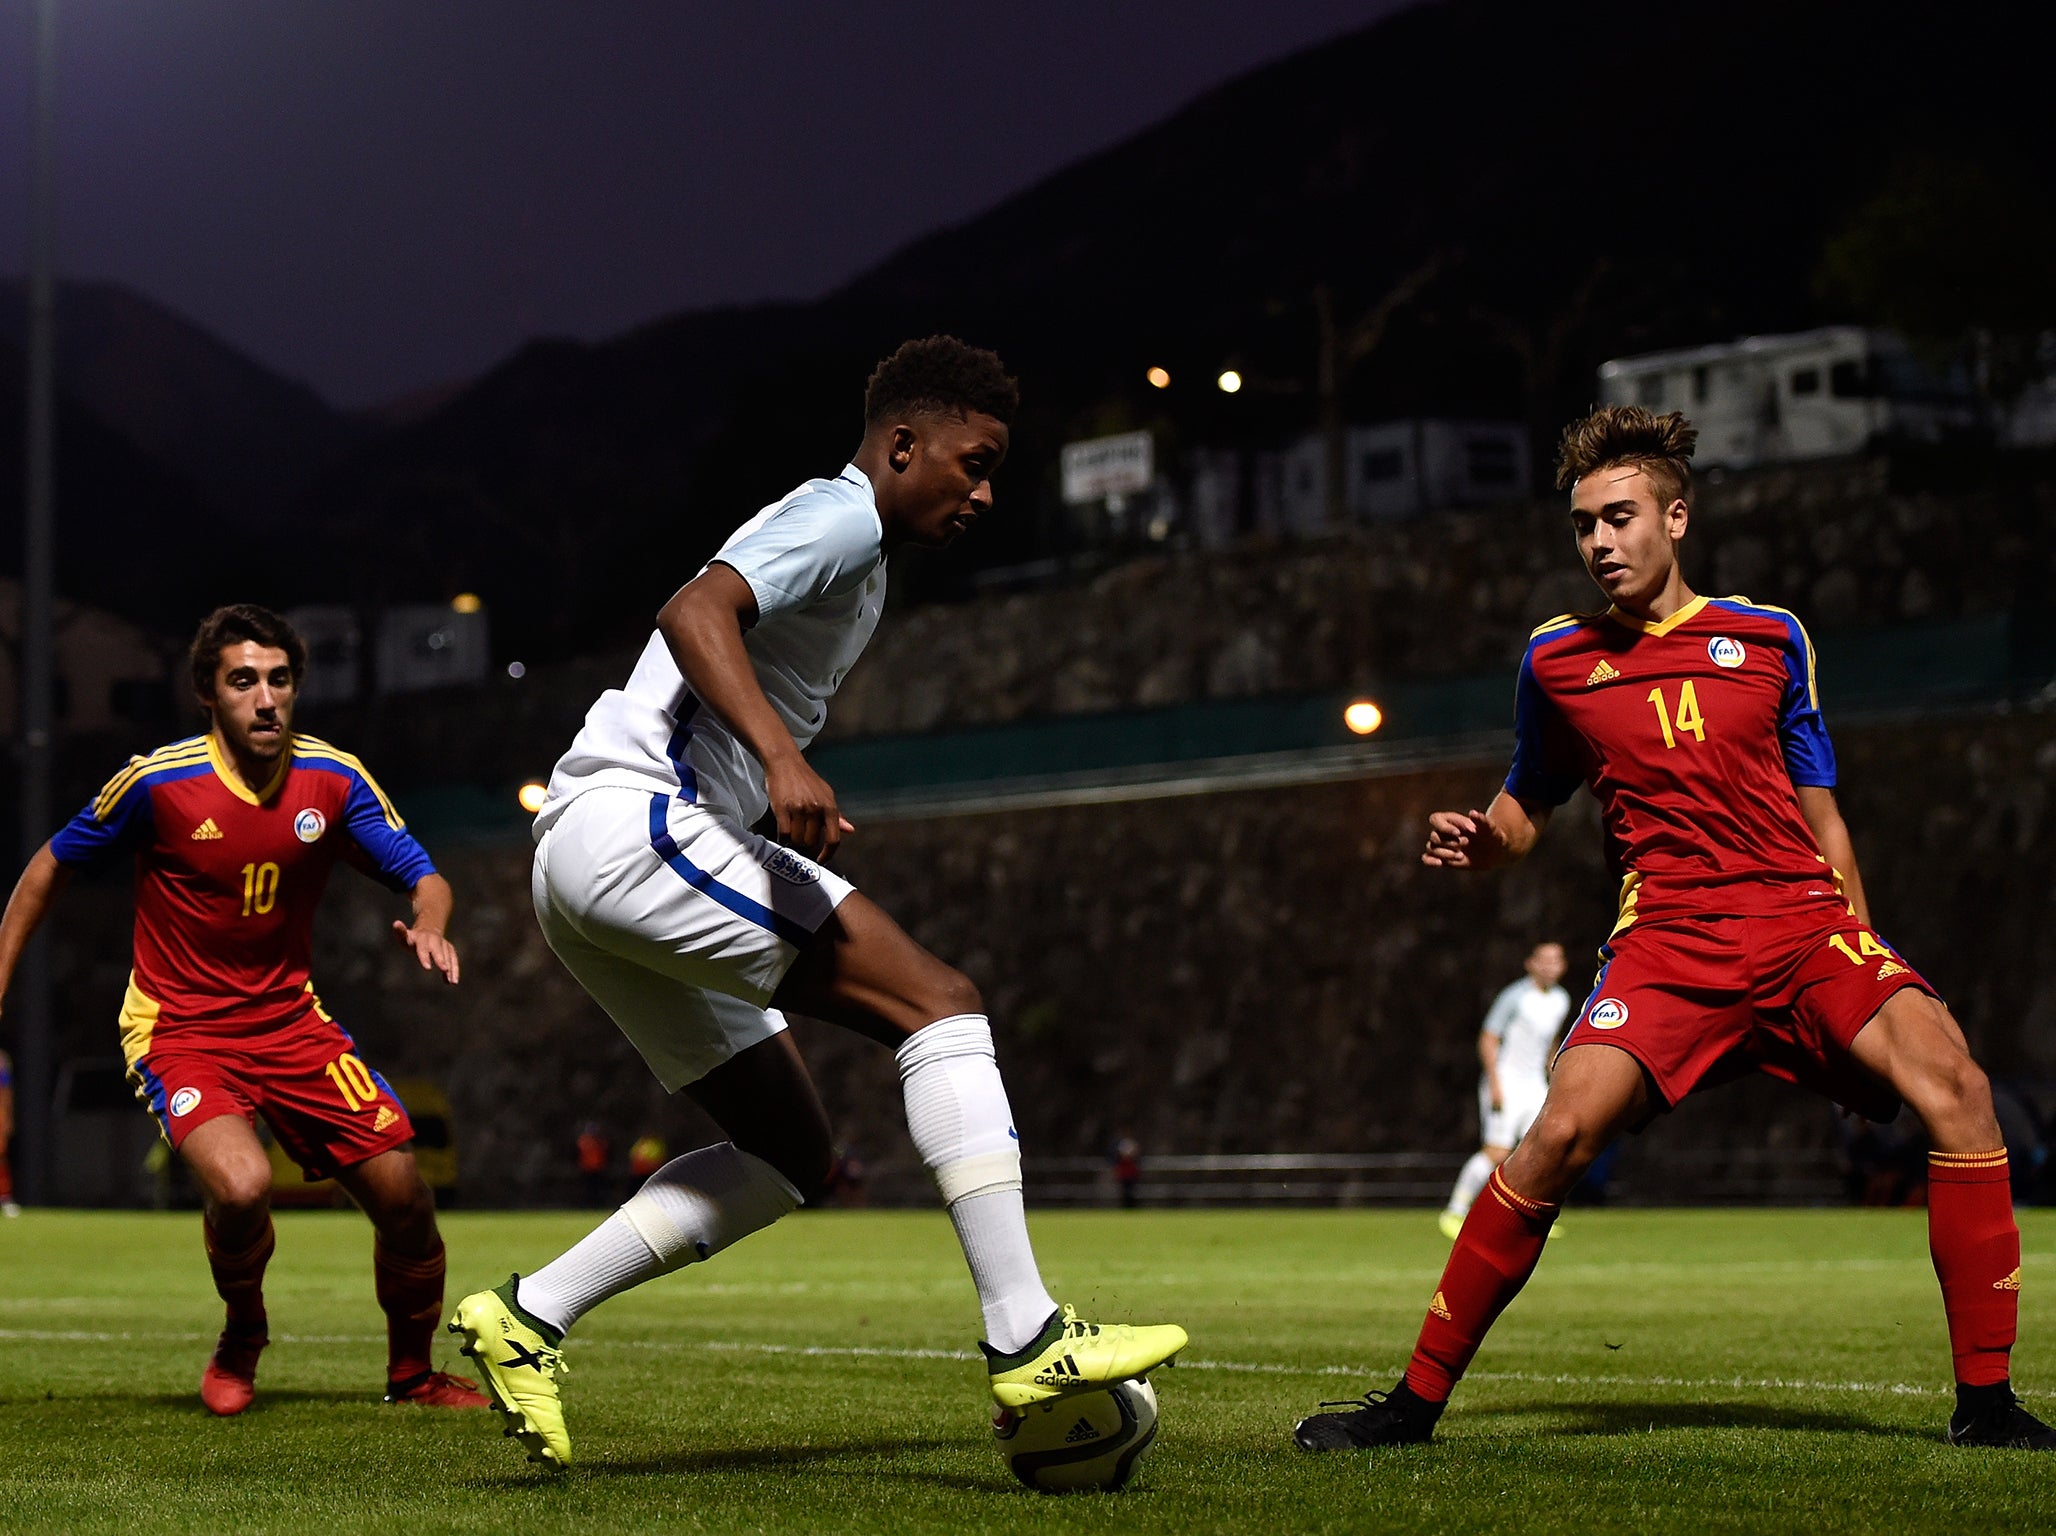 Demarai Gray in action for the young Lions